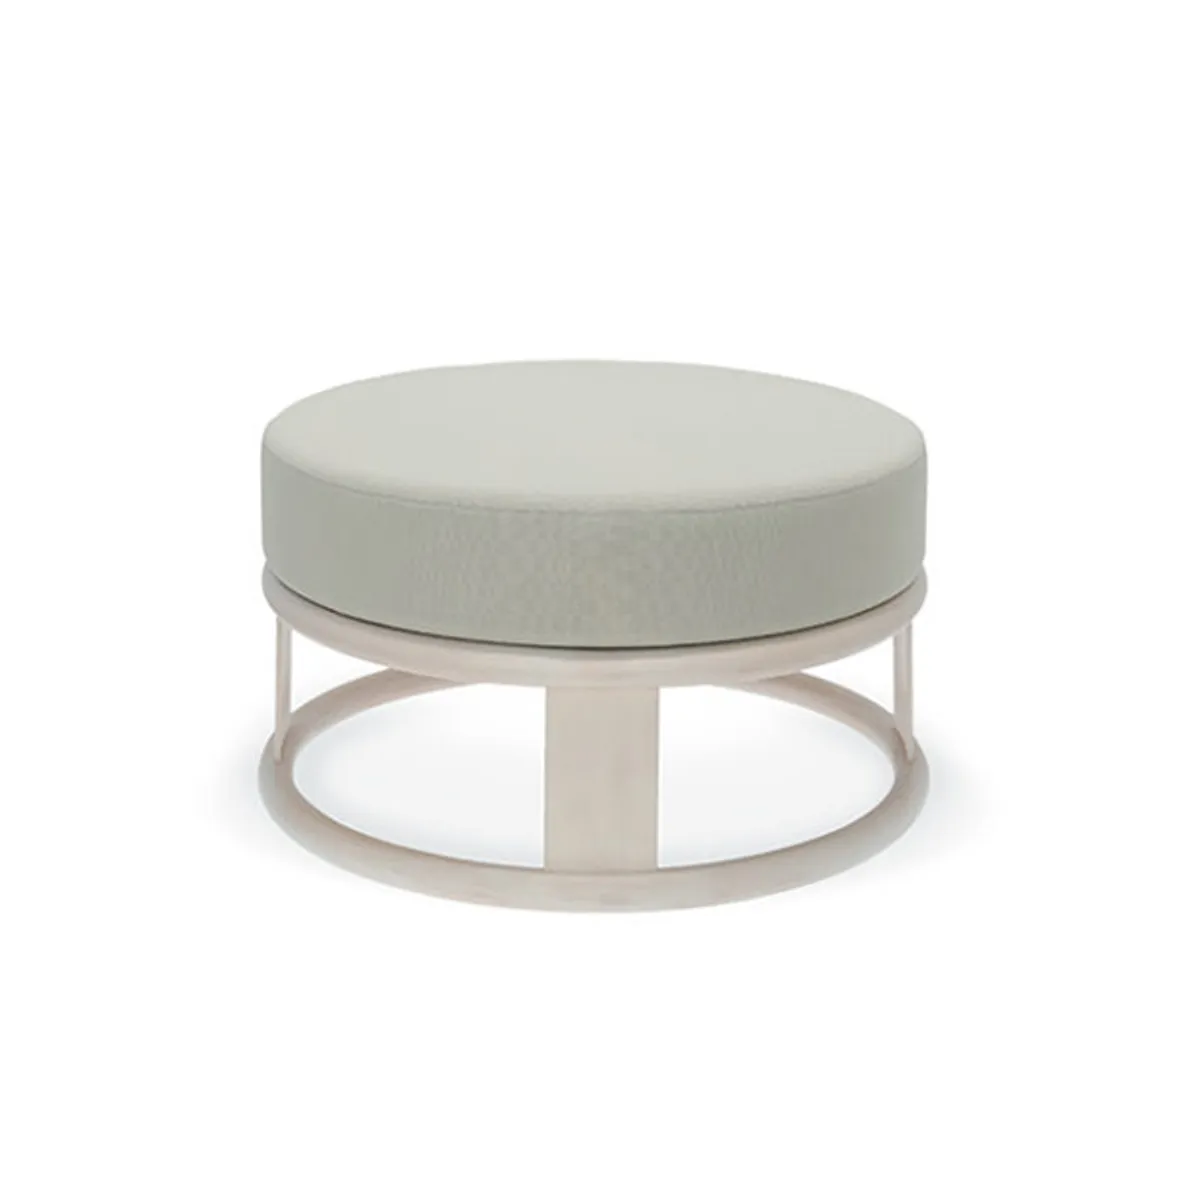 Bakerloo Pouf Contemporary Hotel Furniture By Insideoutcontracts